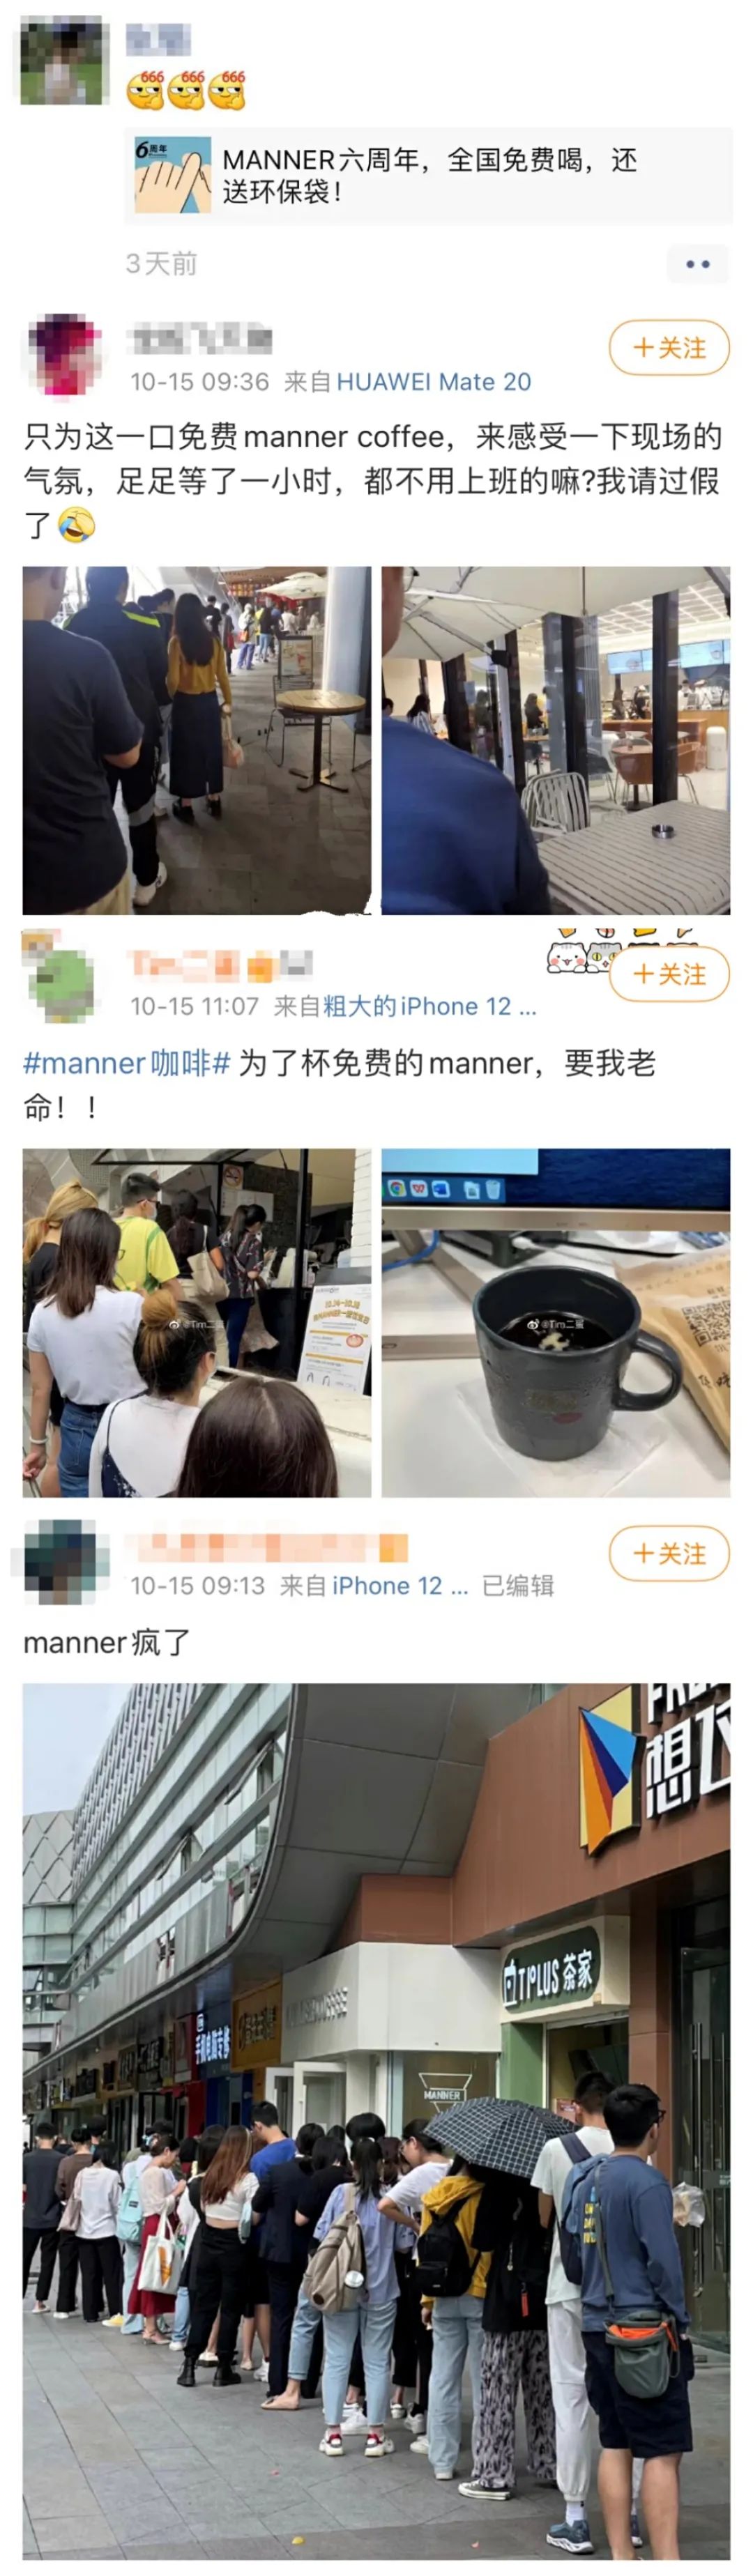 Shanghai coffee brand Manner coffee line is long! Would you like to wait in a long line for free coffee?